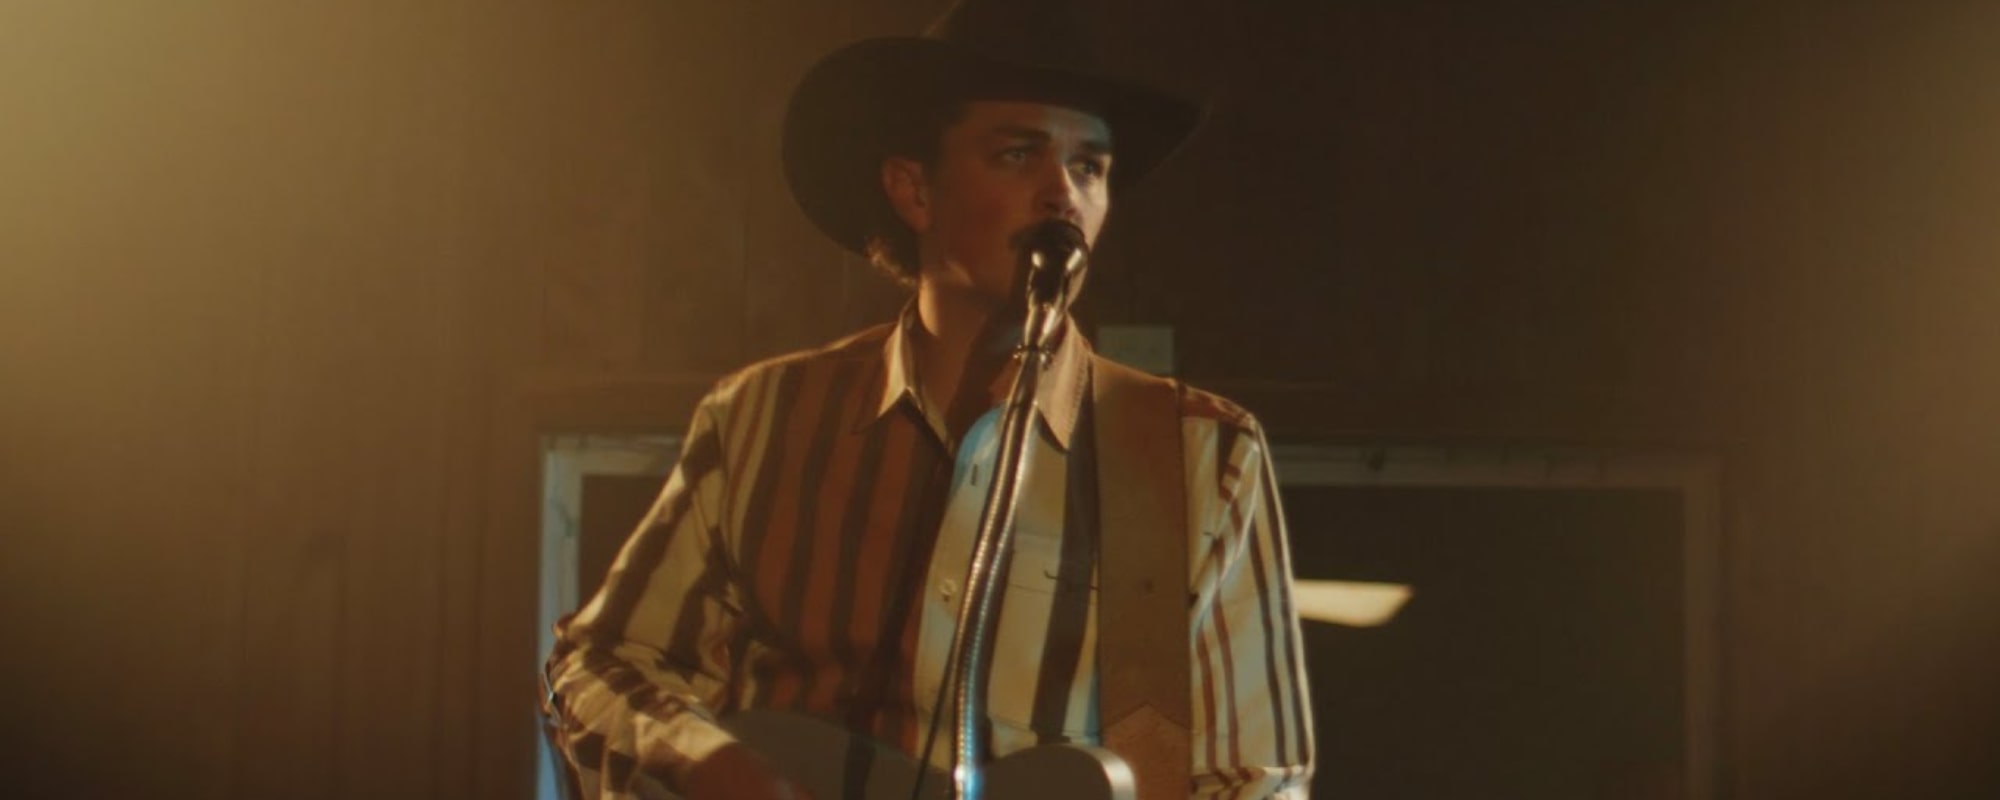 Zach Top’s Neotraditional Country Banger “Sounds Like the Radio” Is the Most-Added Single on Country Radio